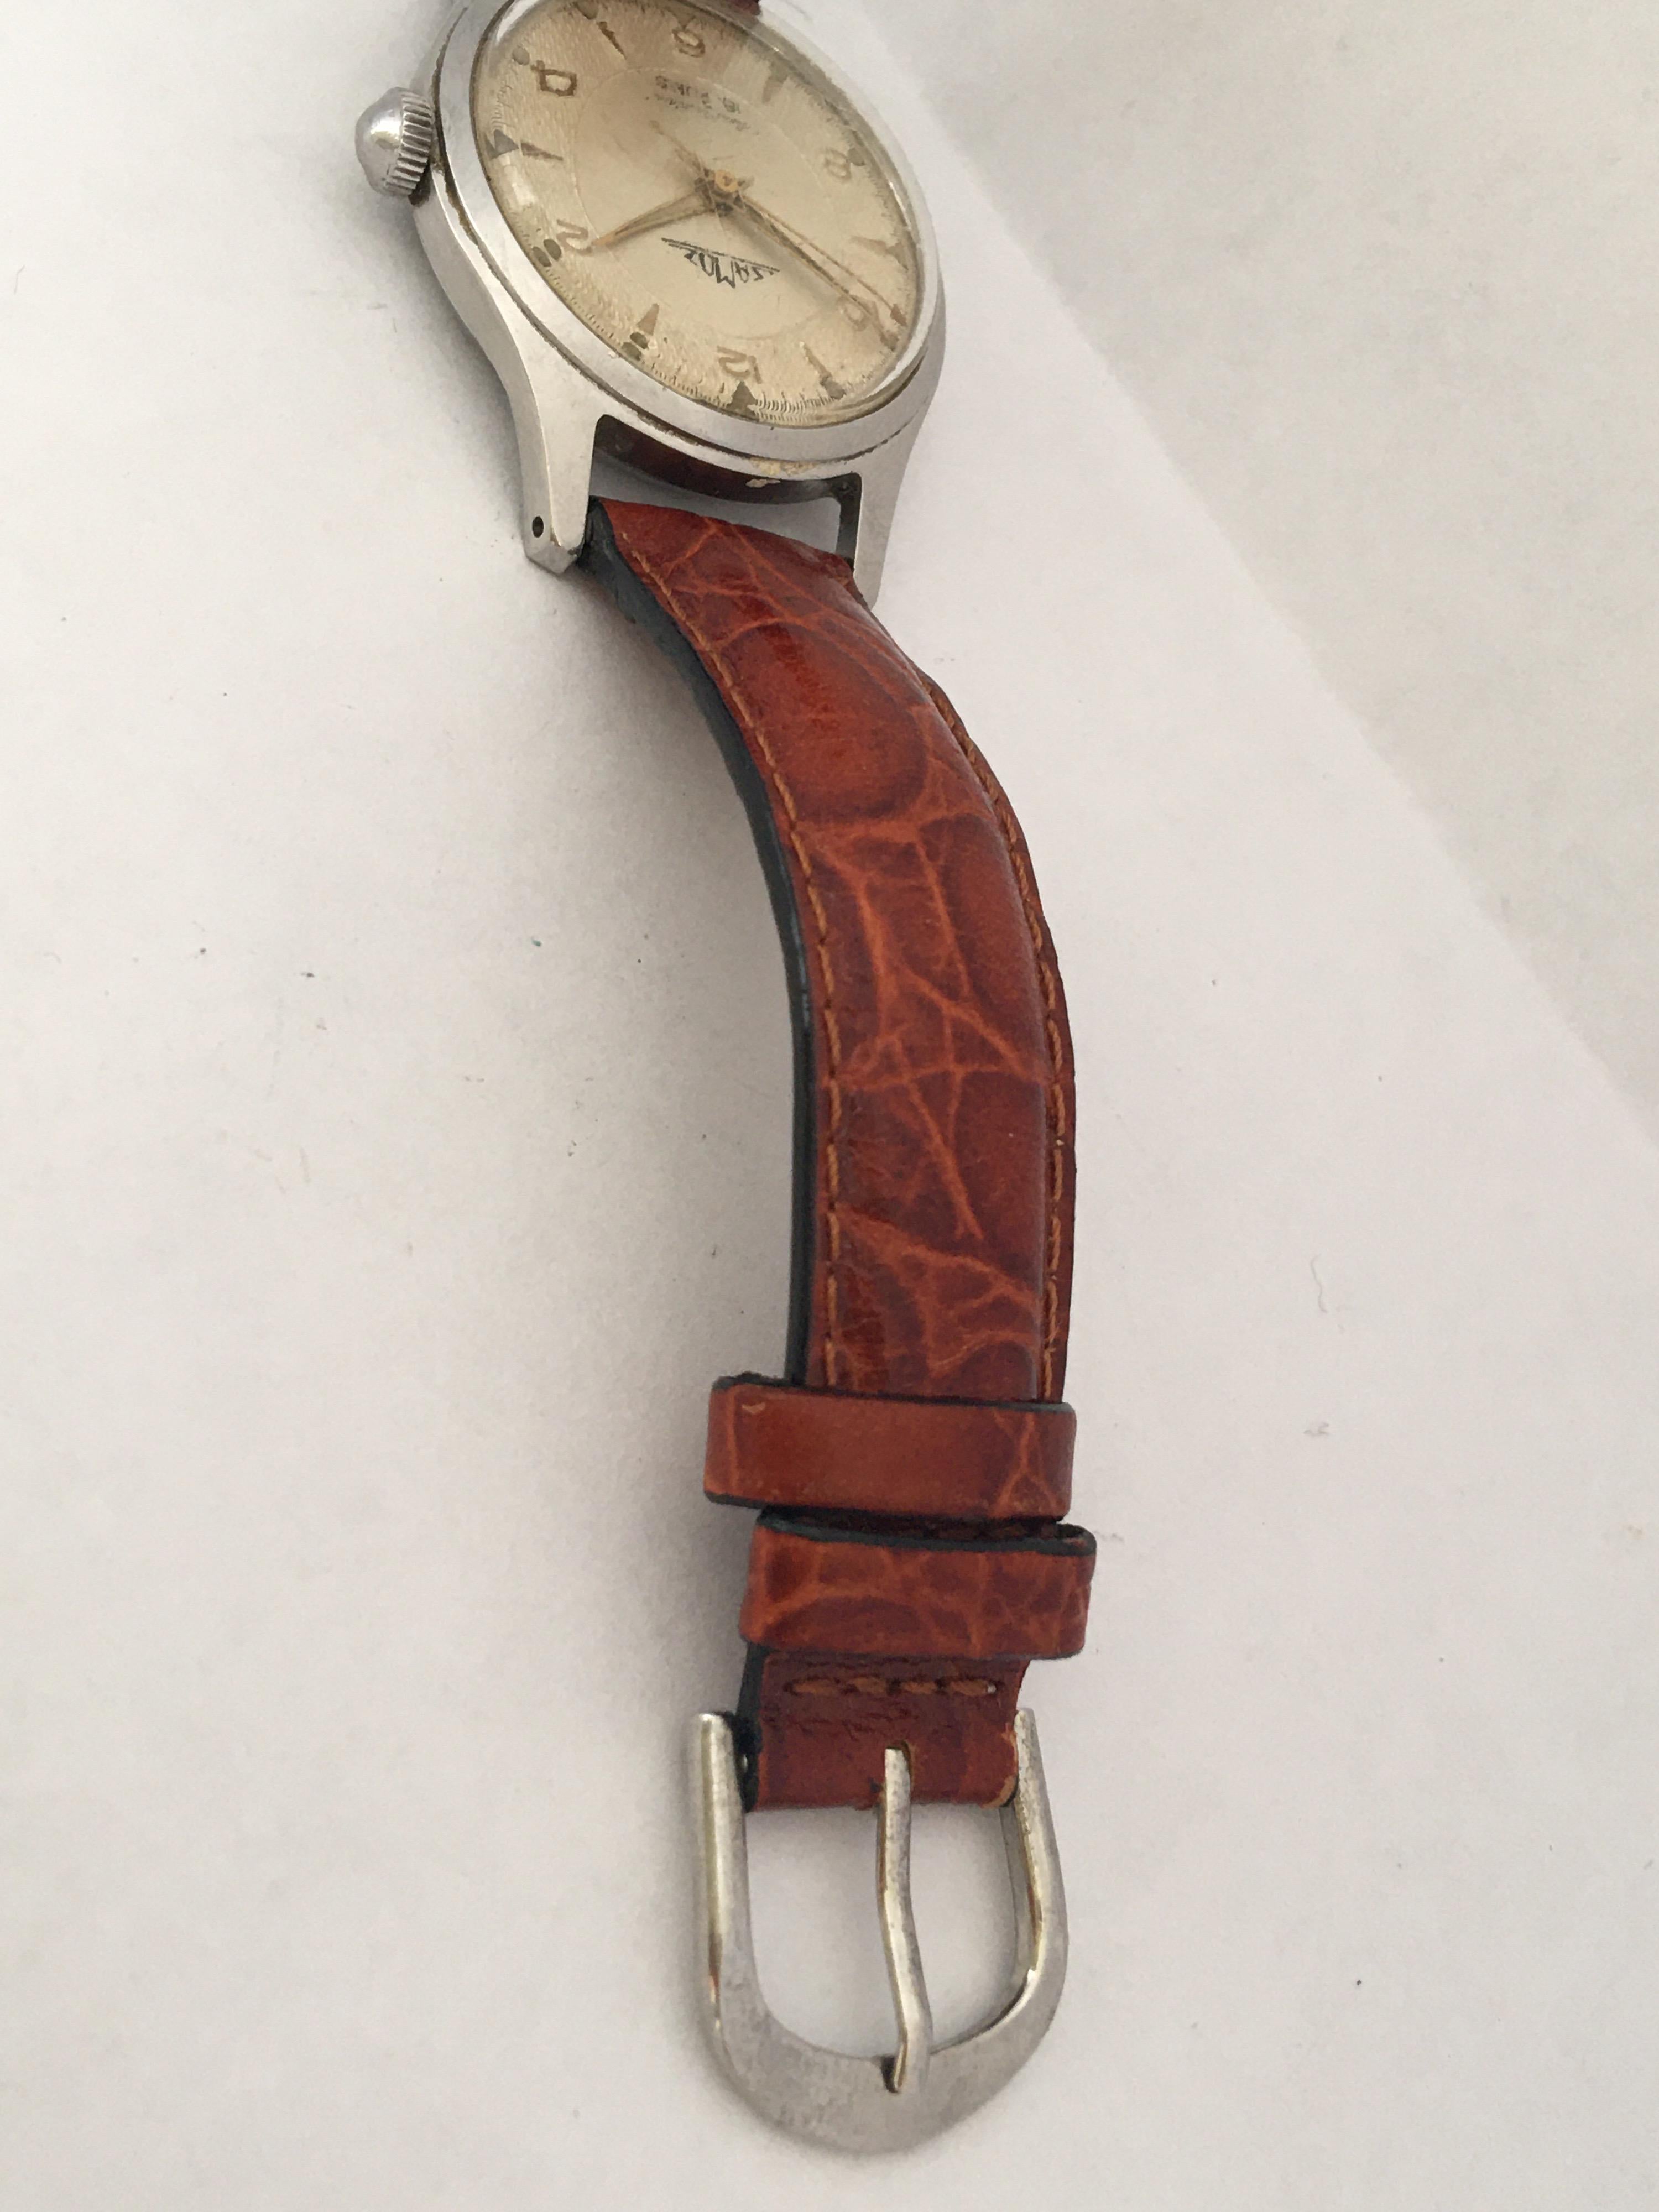 Vintage 1960s Stainless Steel with Sweep Seconds Mechanical Watch For Sale 3